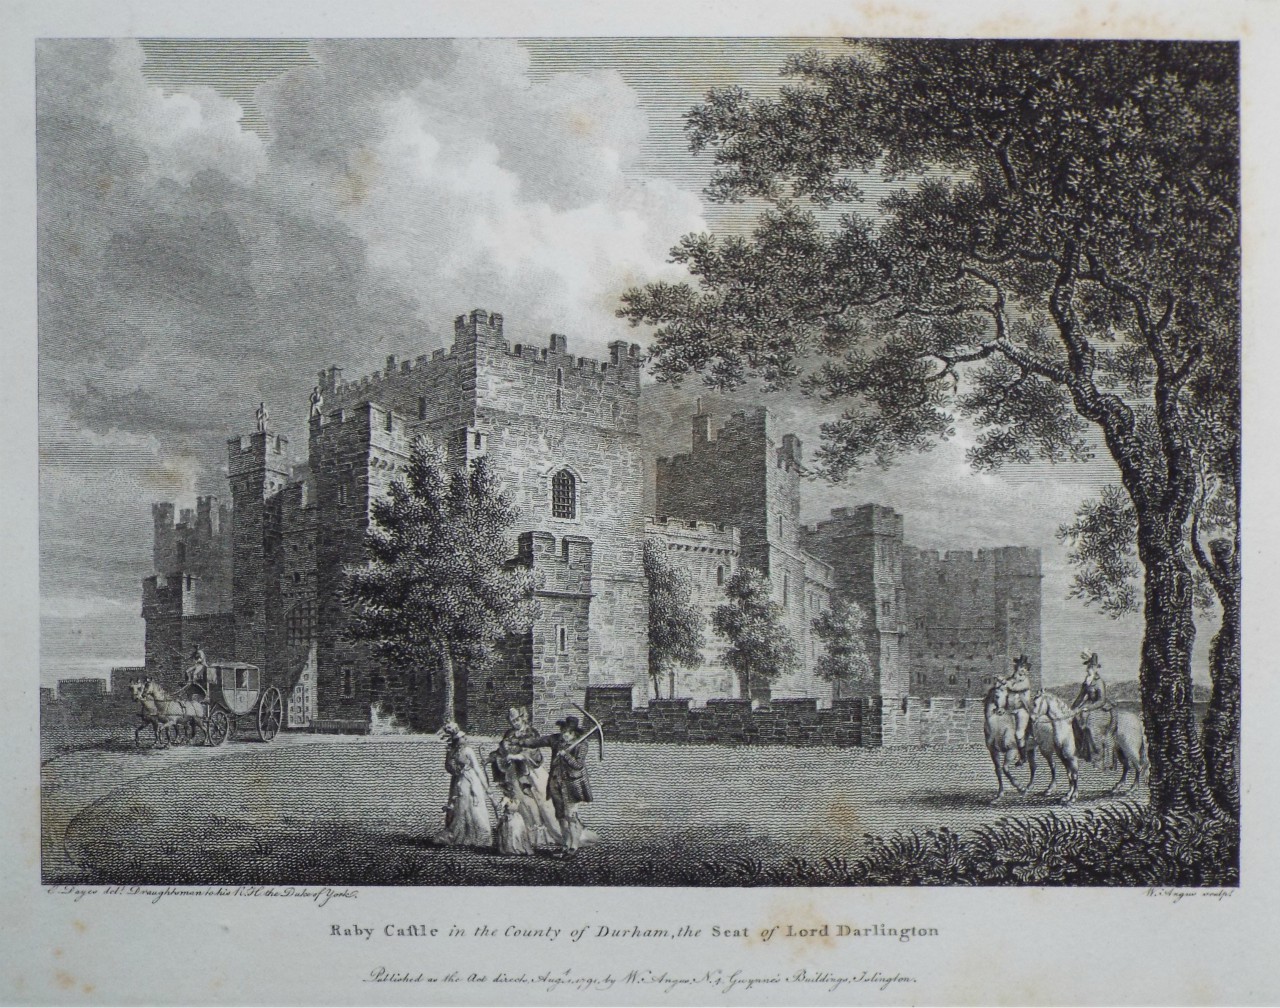 Print - Raby Castle in the County of Durham, the Seat of Lord Darlington. - Angus